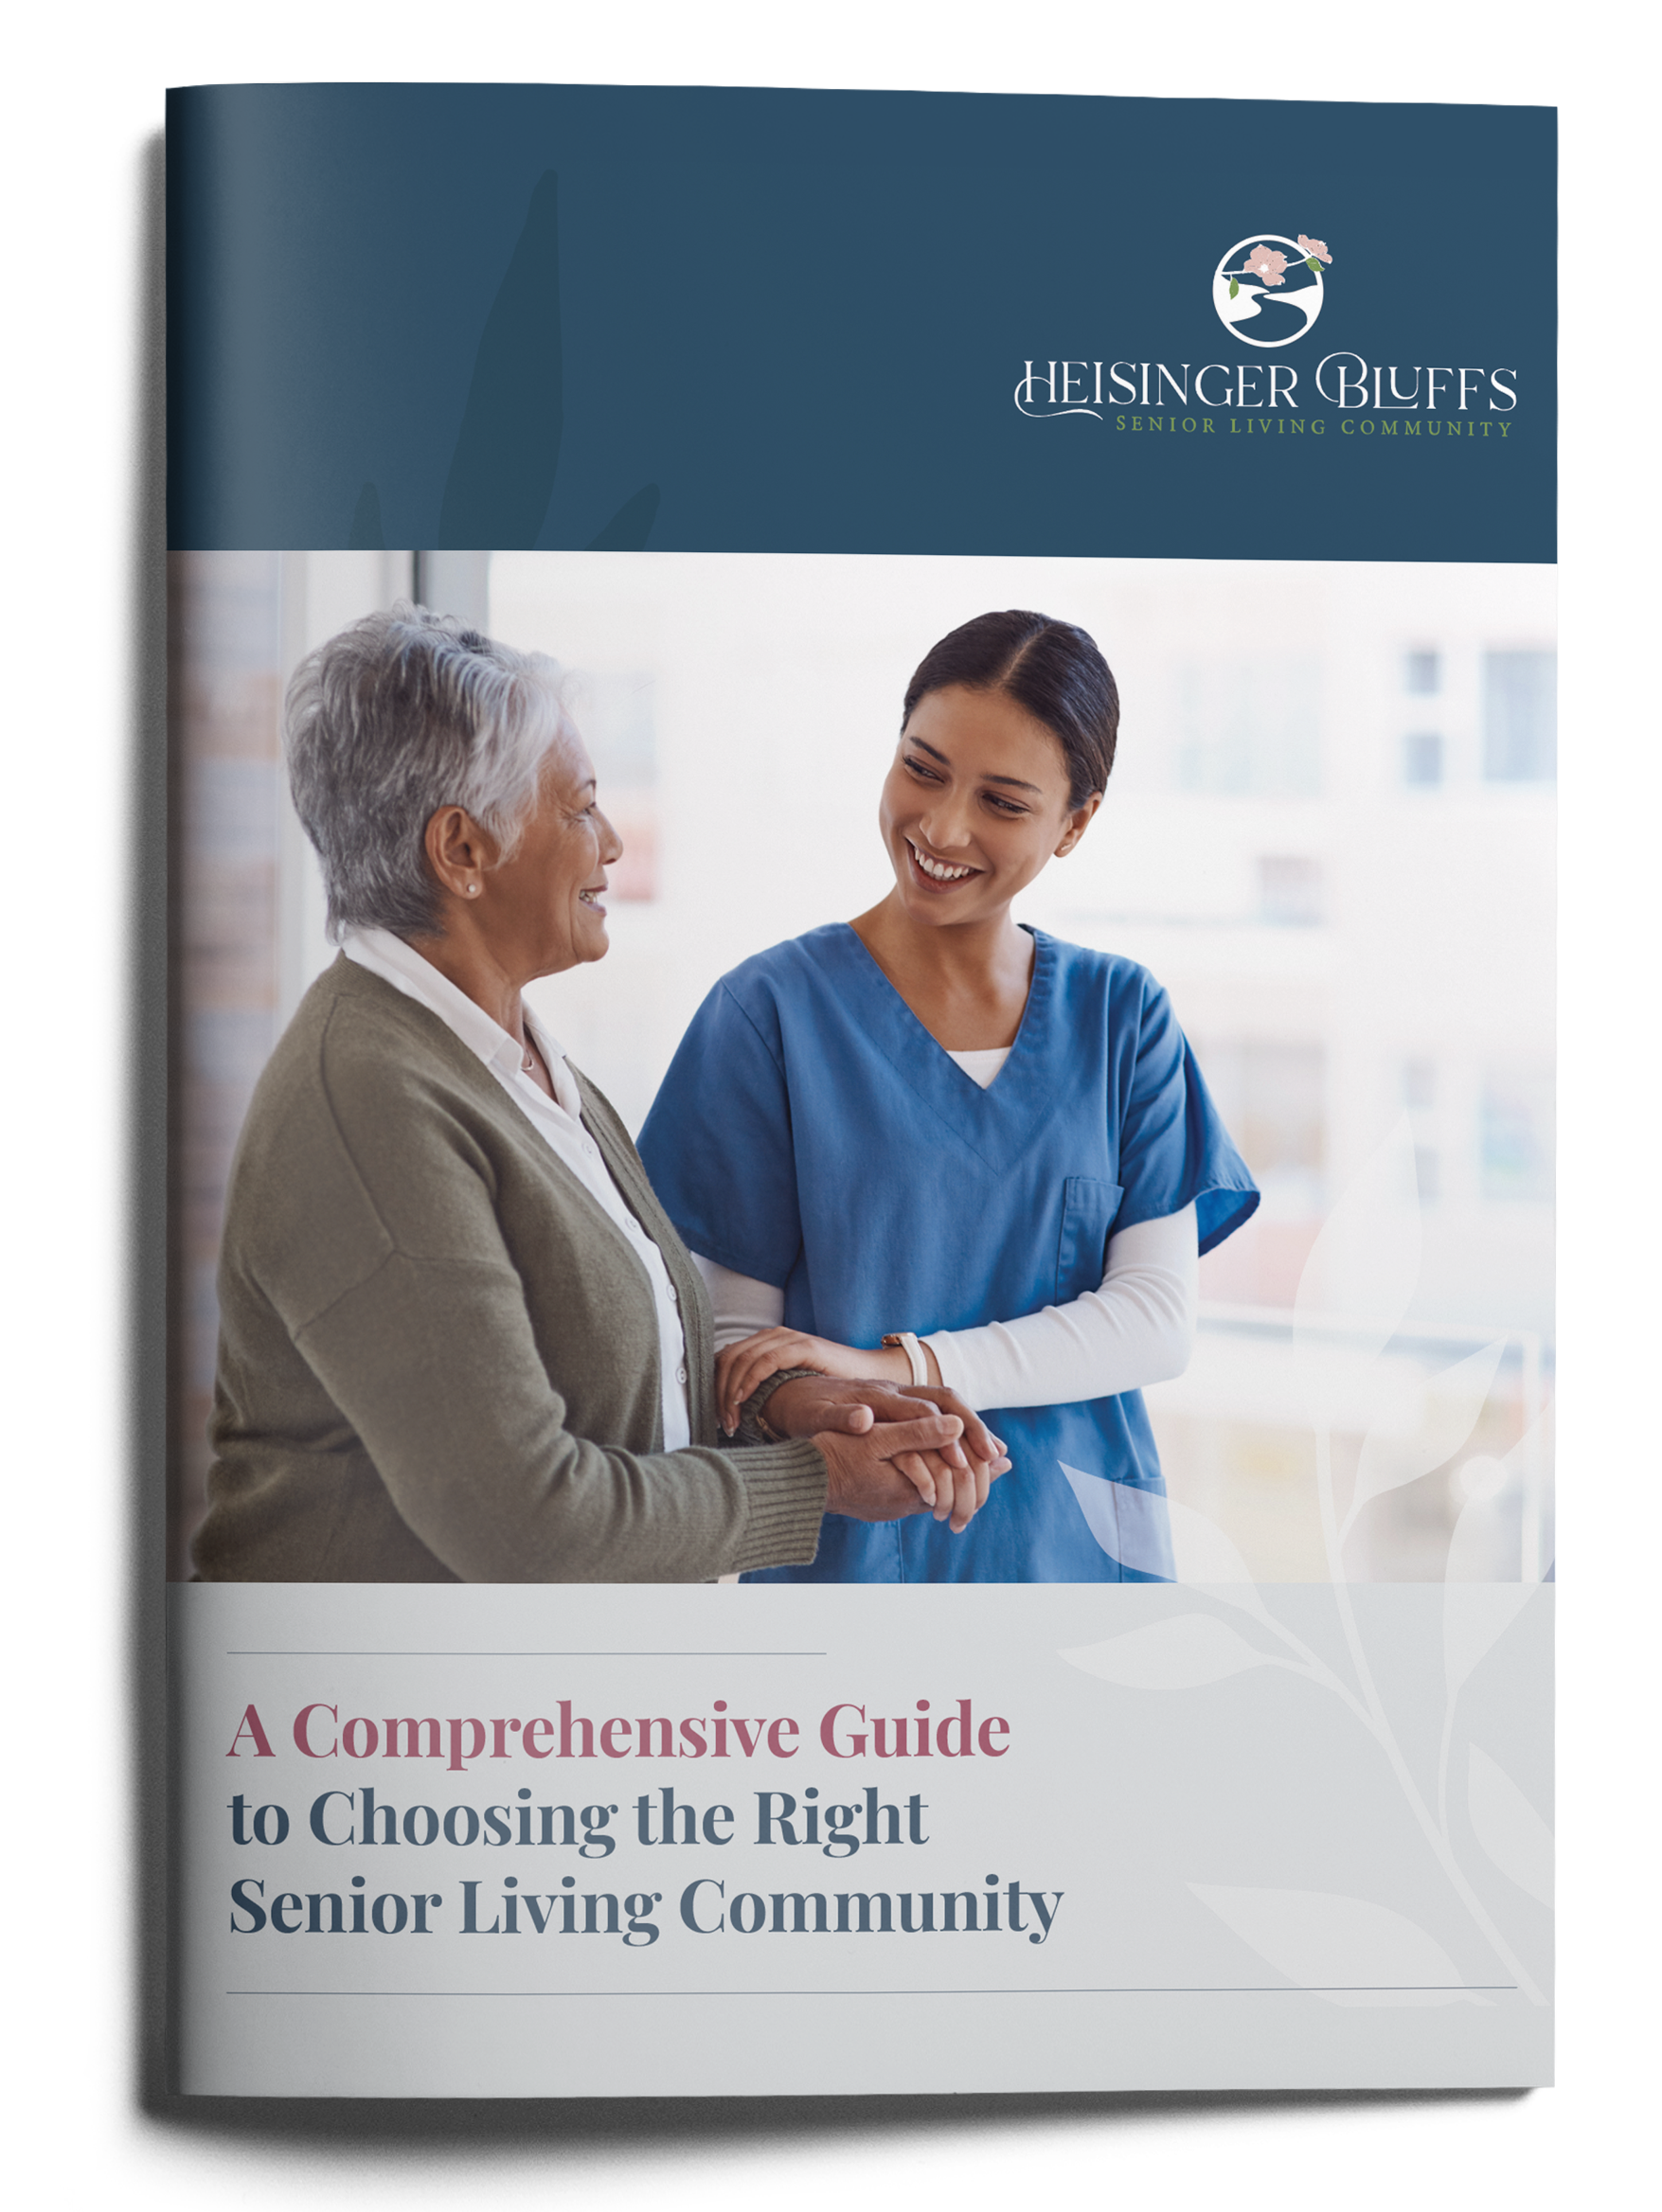 A comprehensive guide to choosing the right senior living community